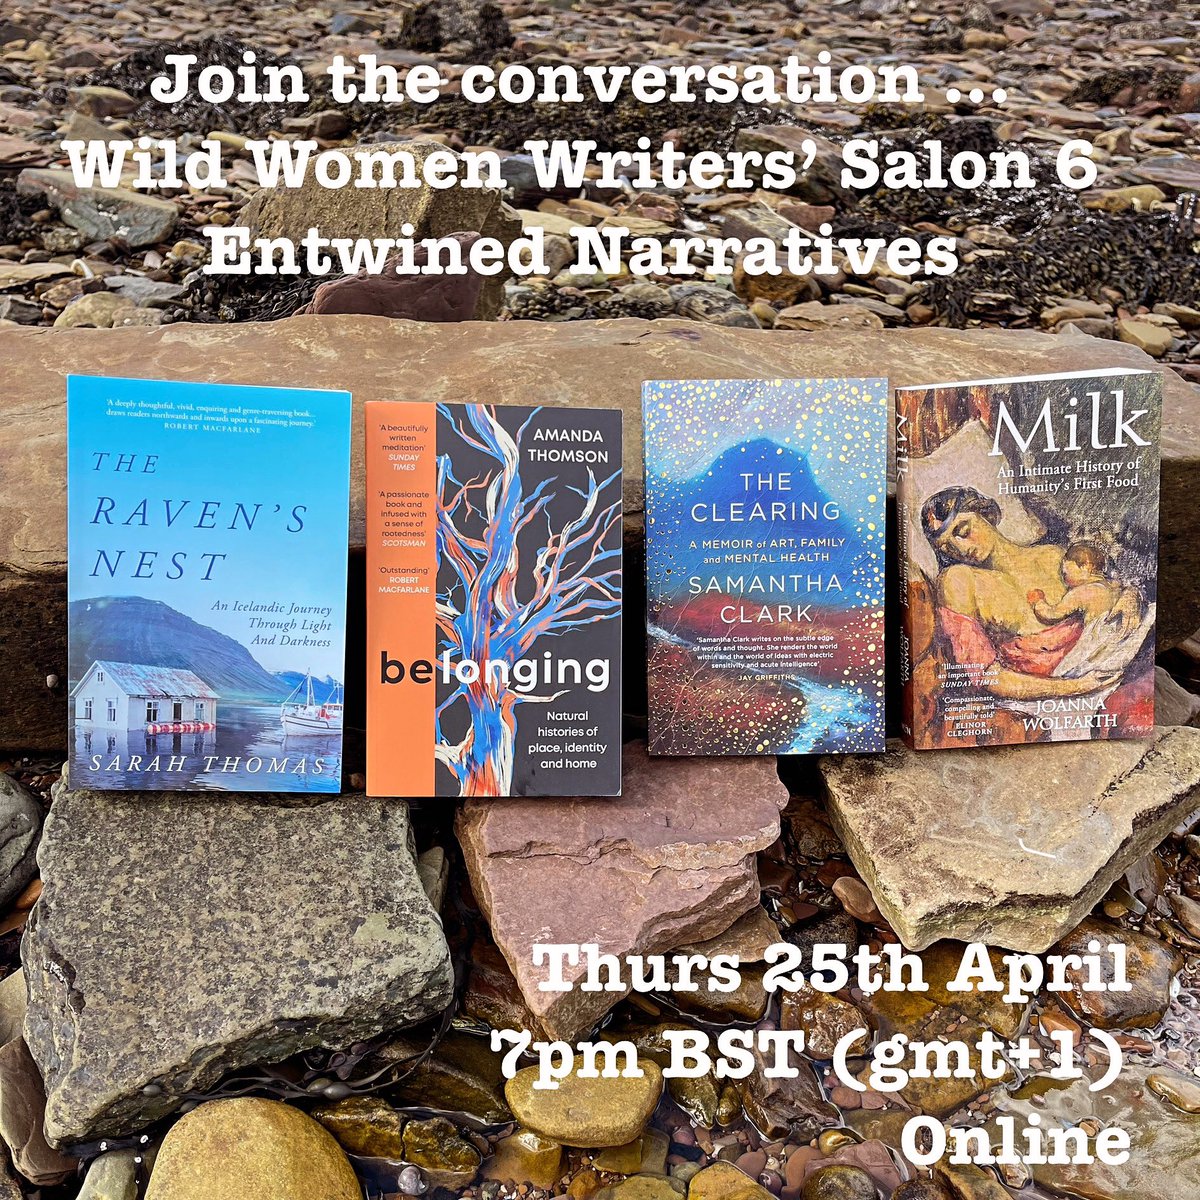 It’s today! A few tickets still available - Pay What You Can🌟 Join me & guest authors @journeysinbtwn @passingplace @sam_clark_art @JoannaWolfarth as we deep dive into the interplay of art & writing in creative practice. Online #memoir #inspiring eventbrite.co.uk/e/wild-women-w…